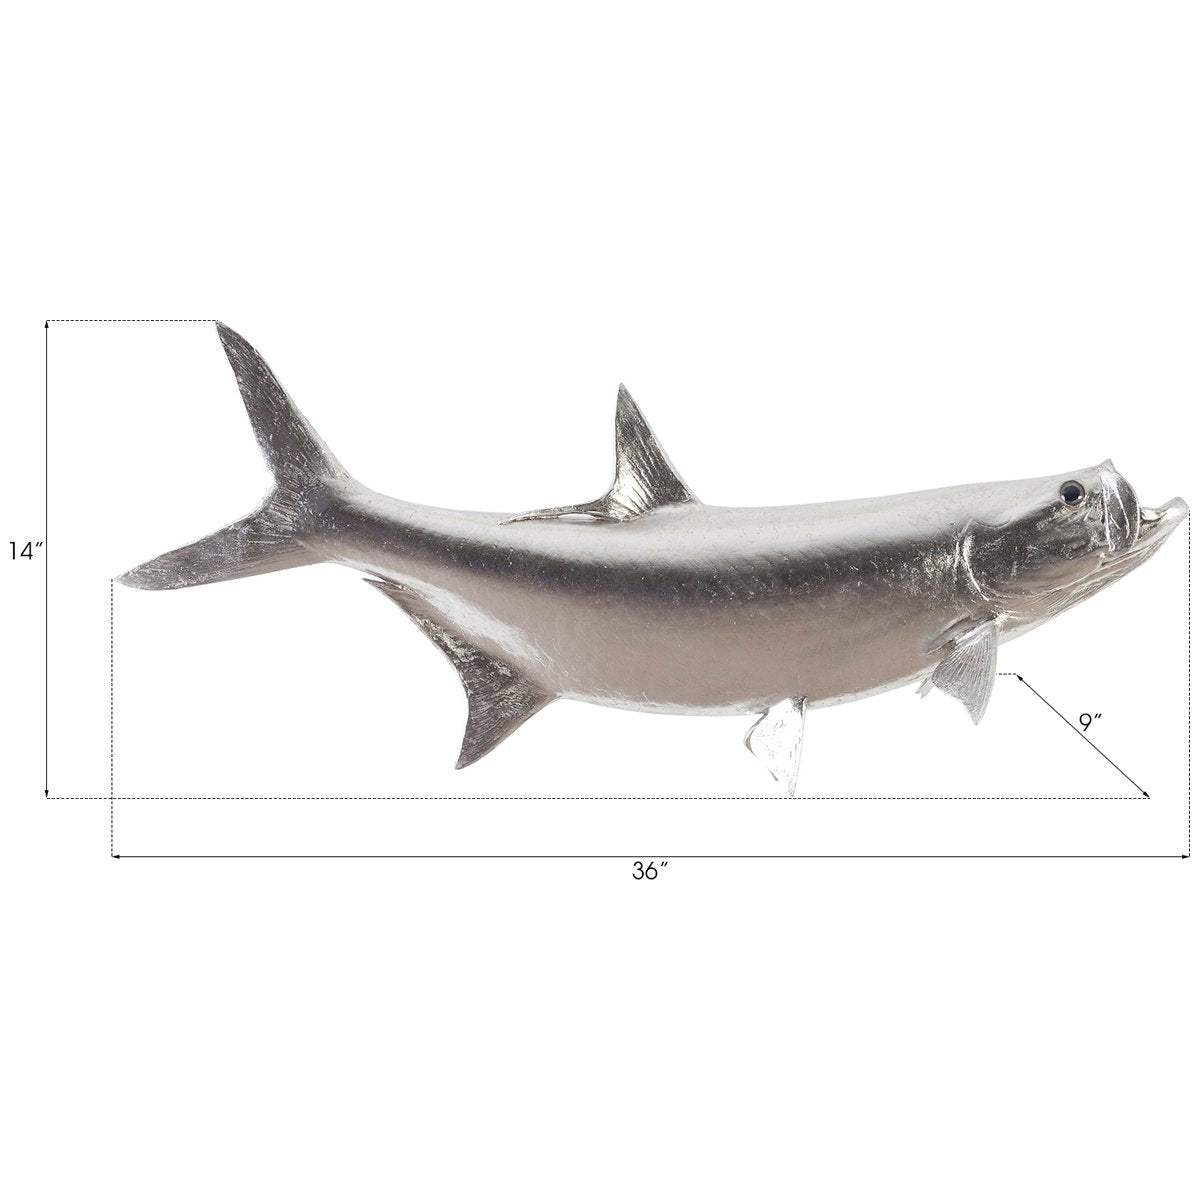 Phillips Collection Tarpon Fish Wall Sculpture, Silver Leaf